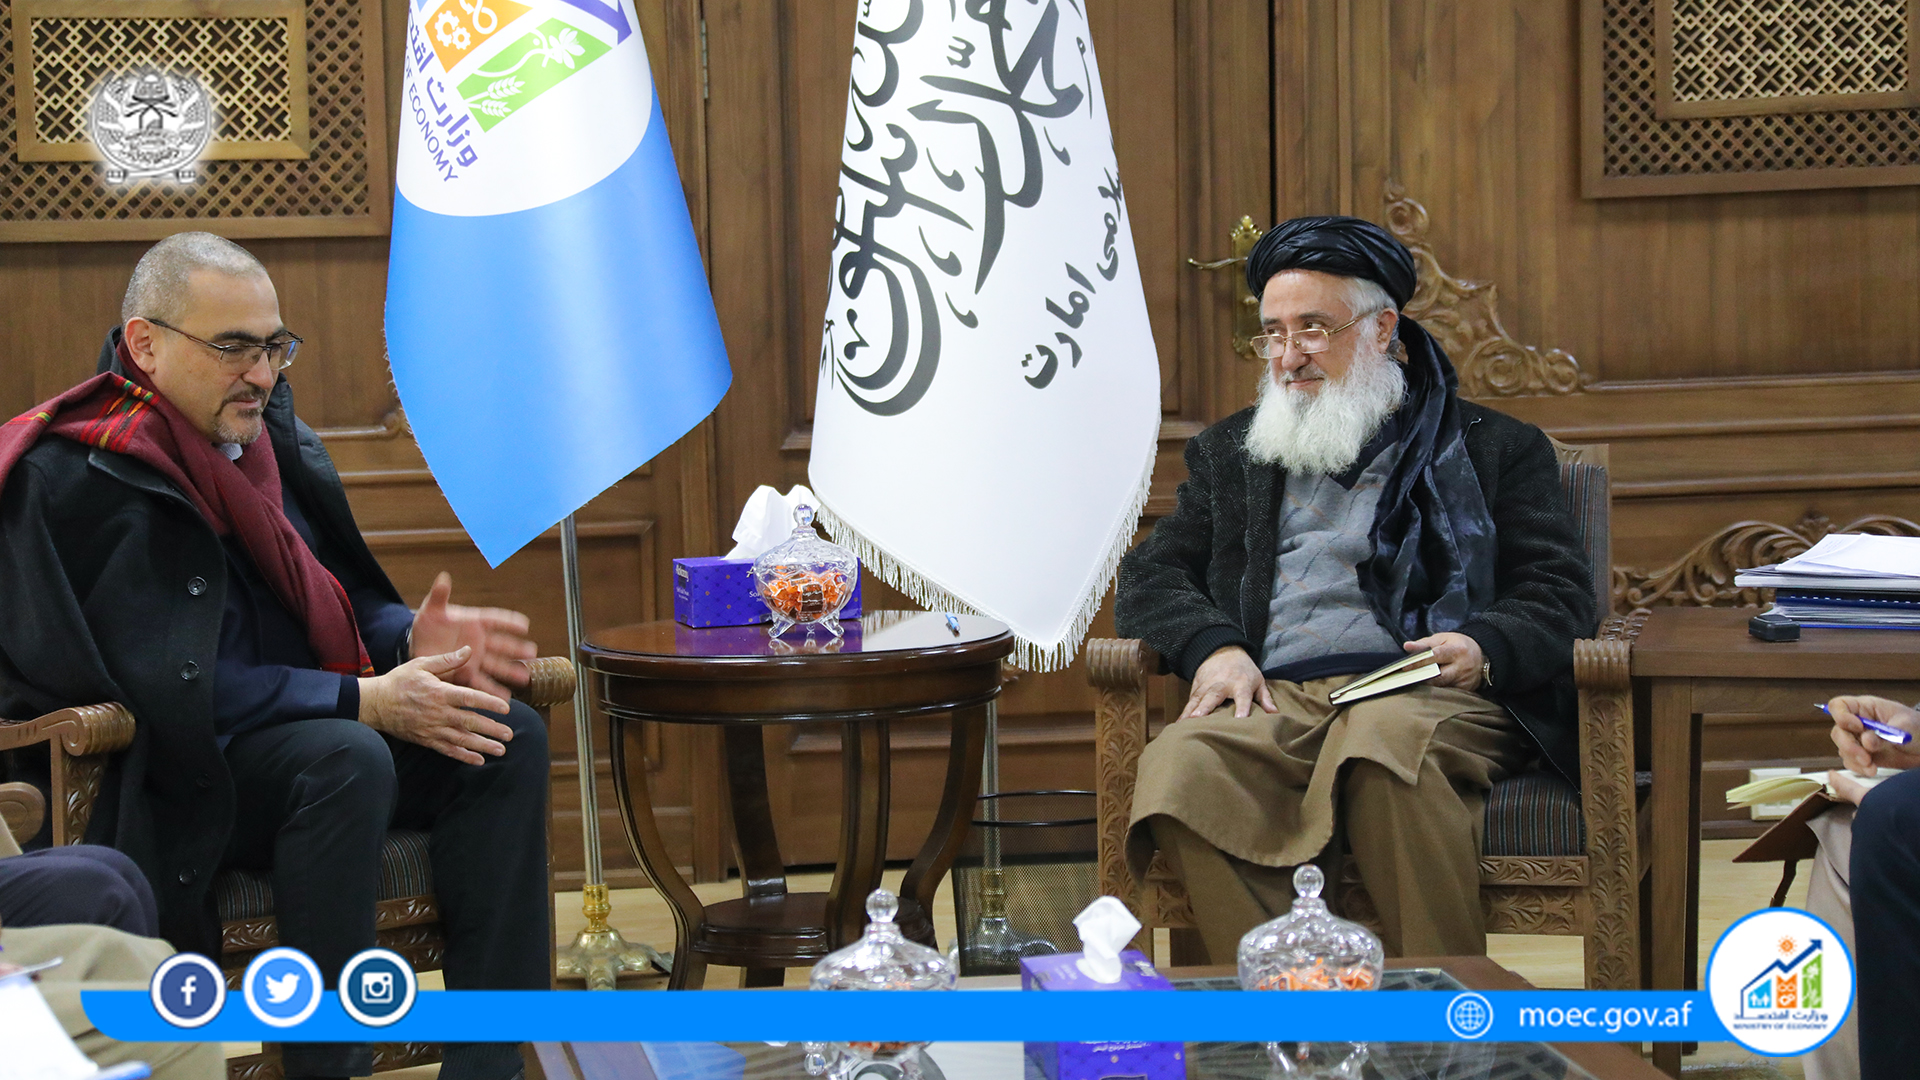 Alhaj Qari Din Mohammad Hanif, the Acting Minister of Economy, met with Ramzalakbarov, the special representative of the United Nations in Afghanistan